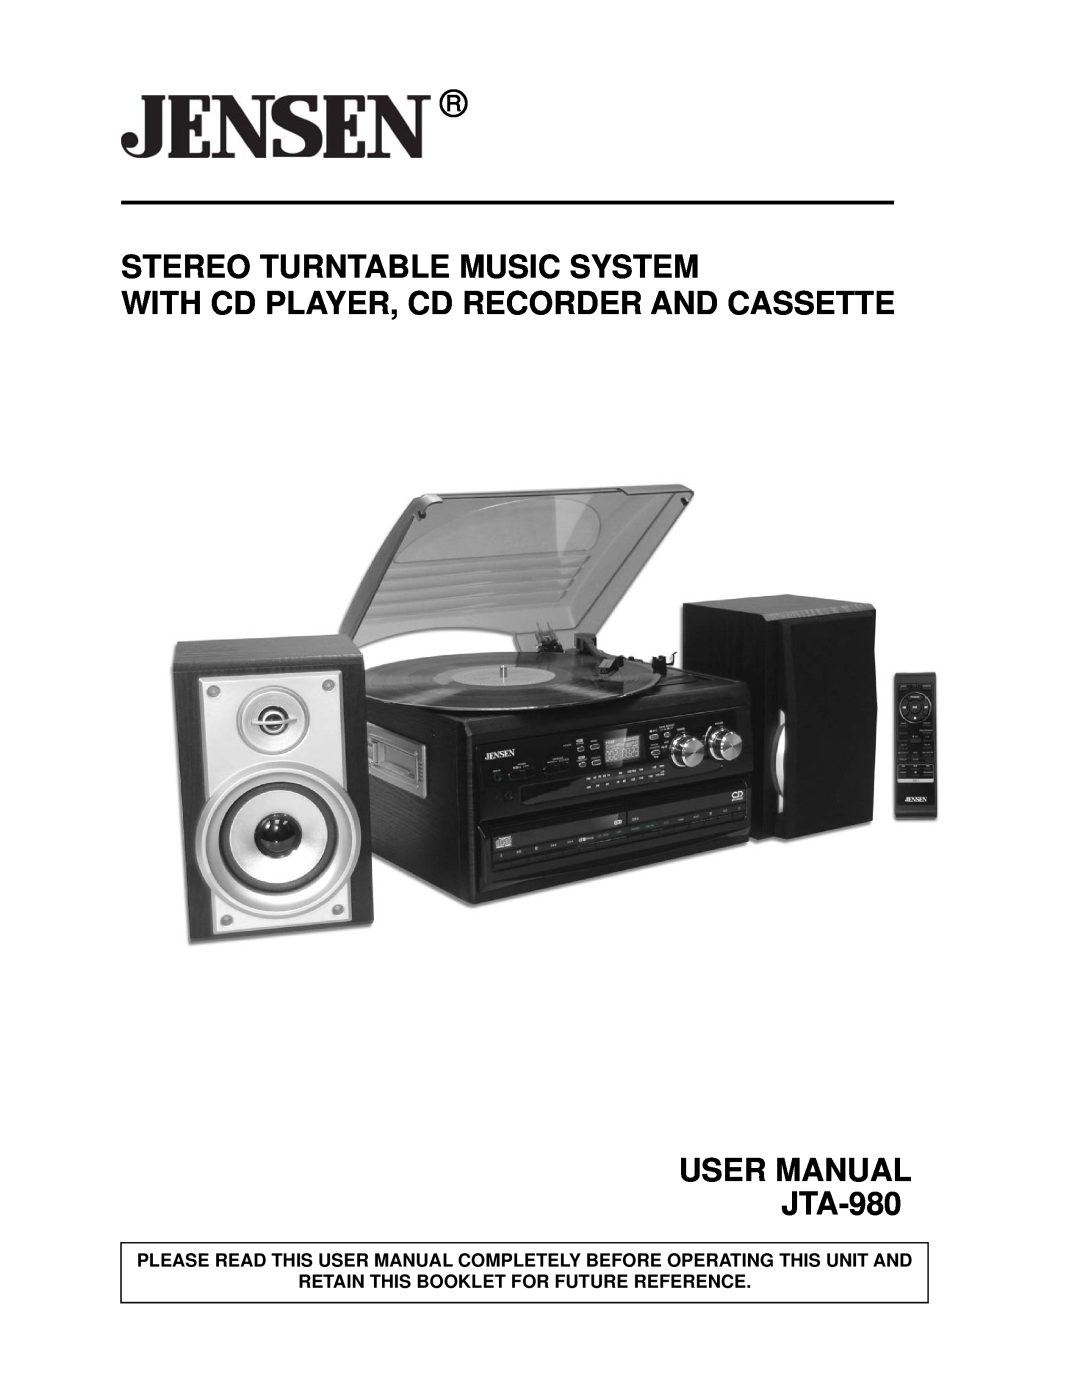 Jensen JTA-980 user manual Stereo Turntable Music System, With Cd Player, Cd Recorder And Cassette 